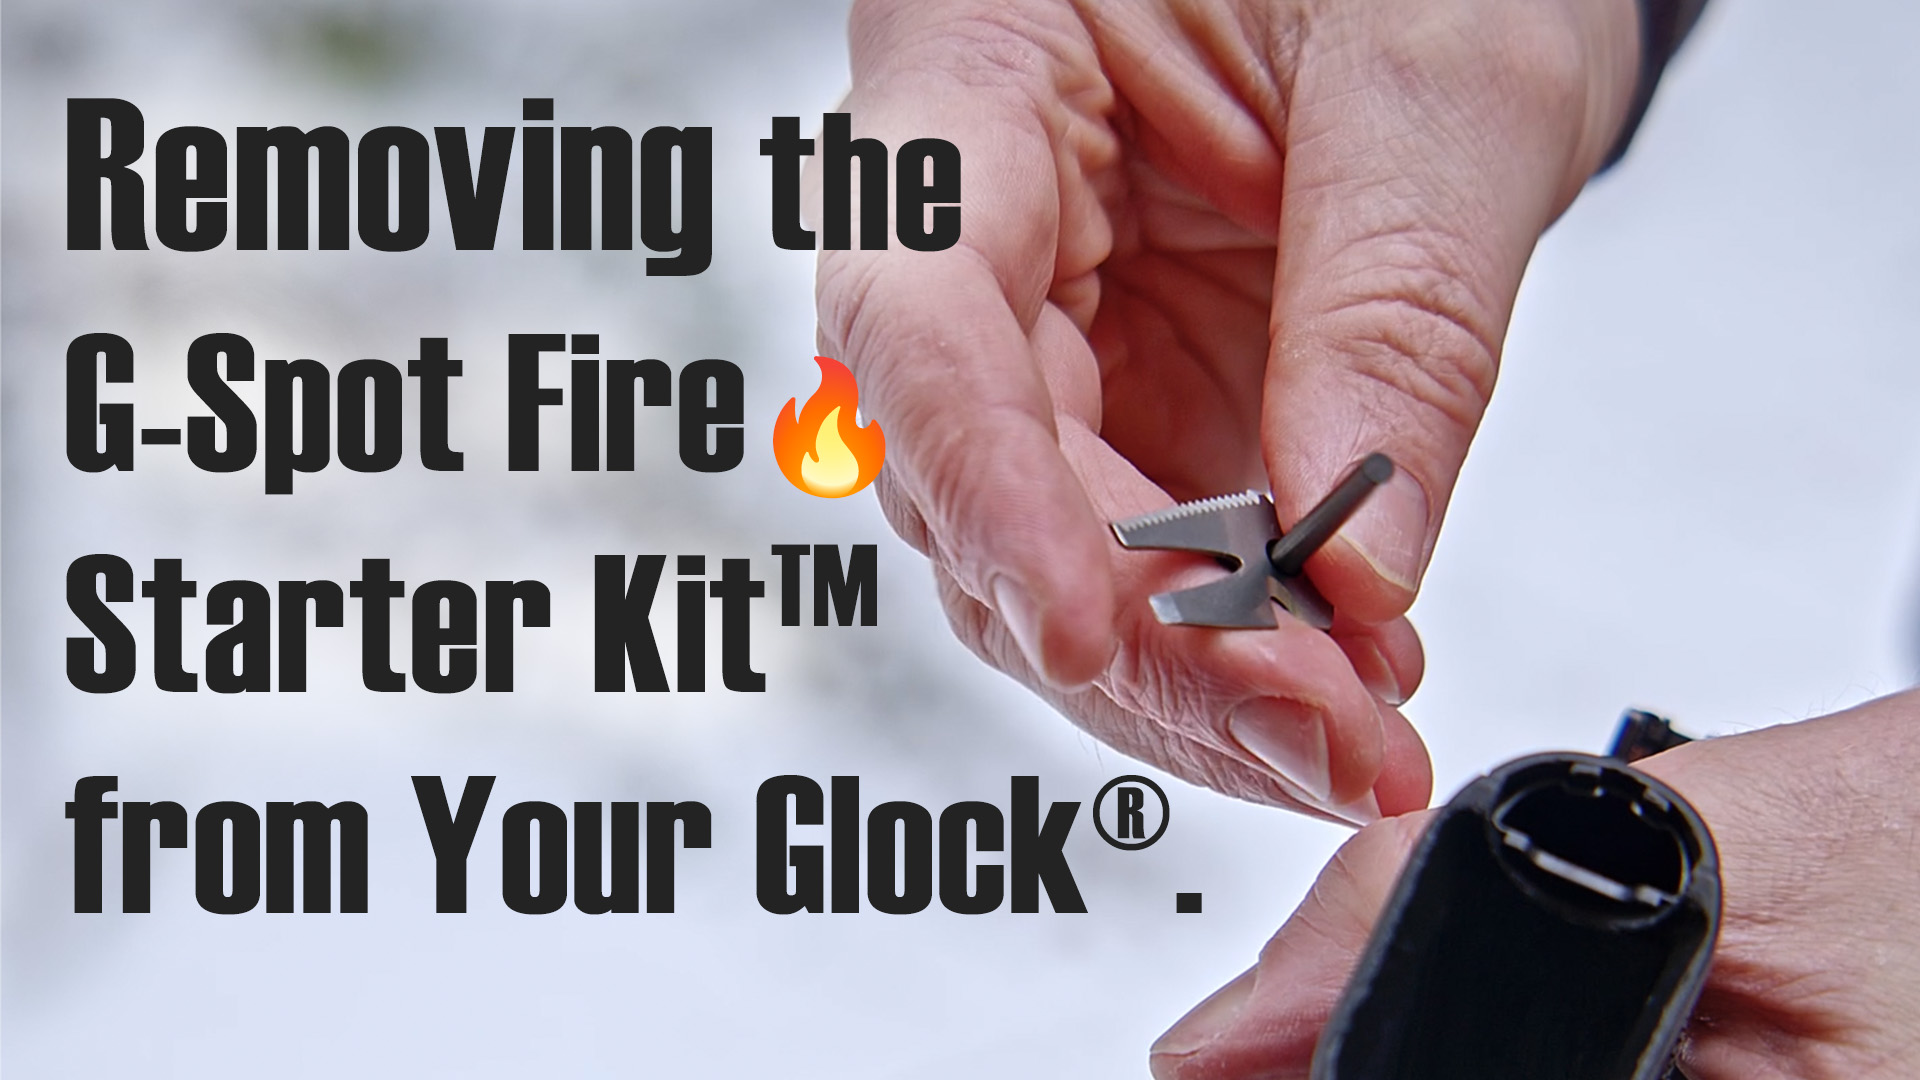 Removing the G-Spot from your Glock®